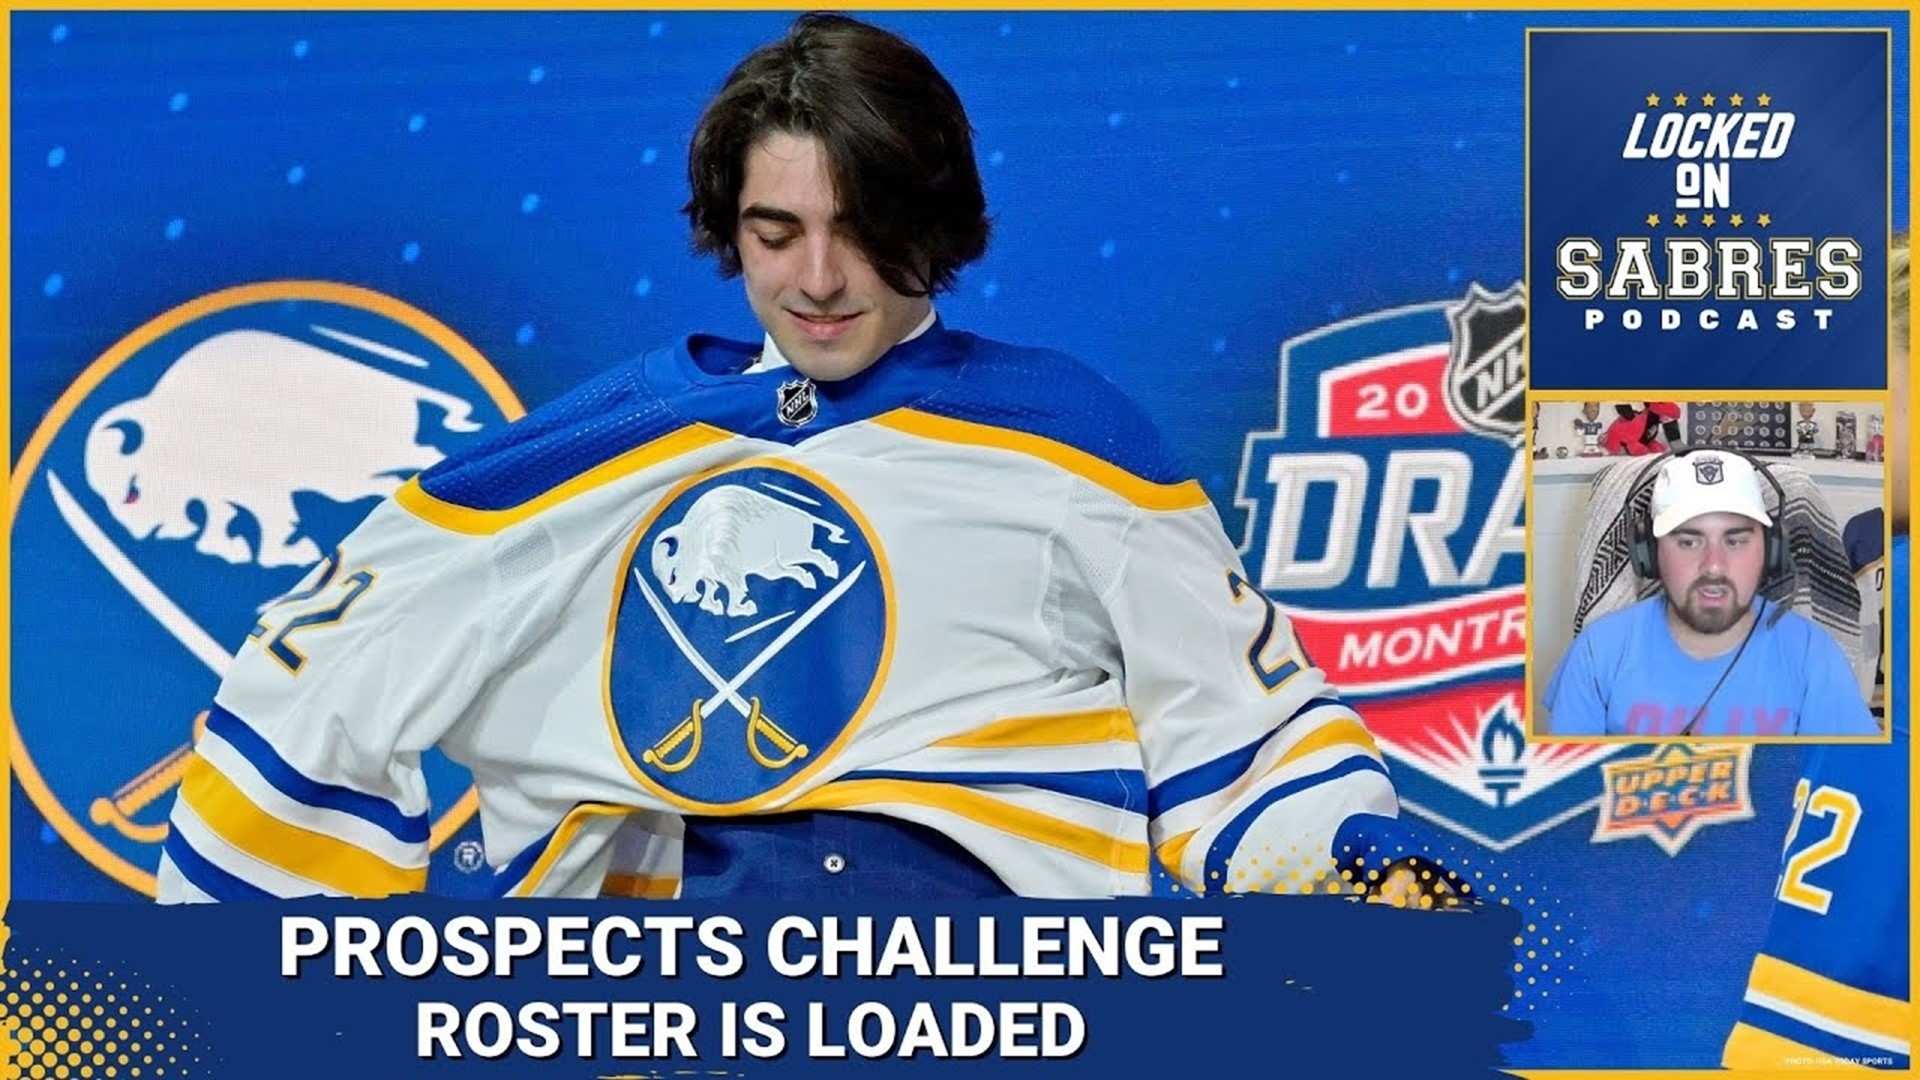 The Sabres Prospects Challenge starts on Friday and the Sabres roster is loaded! Sneaky Joe breaks down who's on the team.